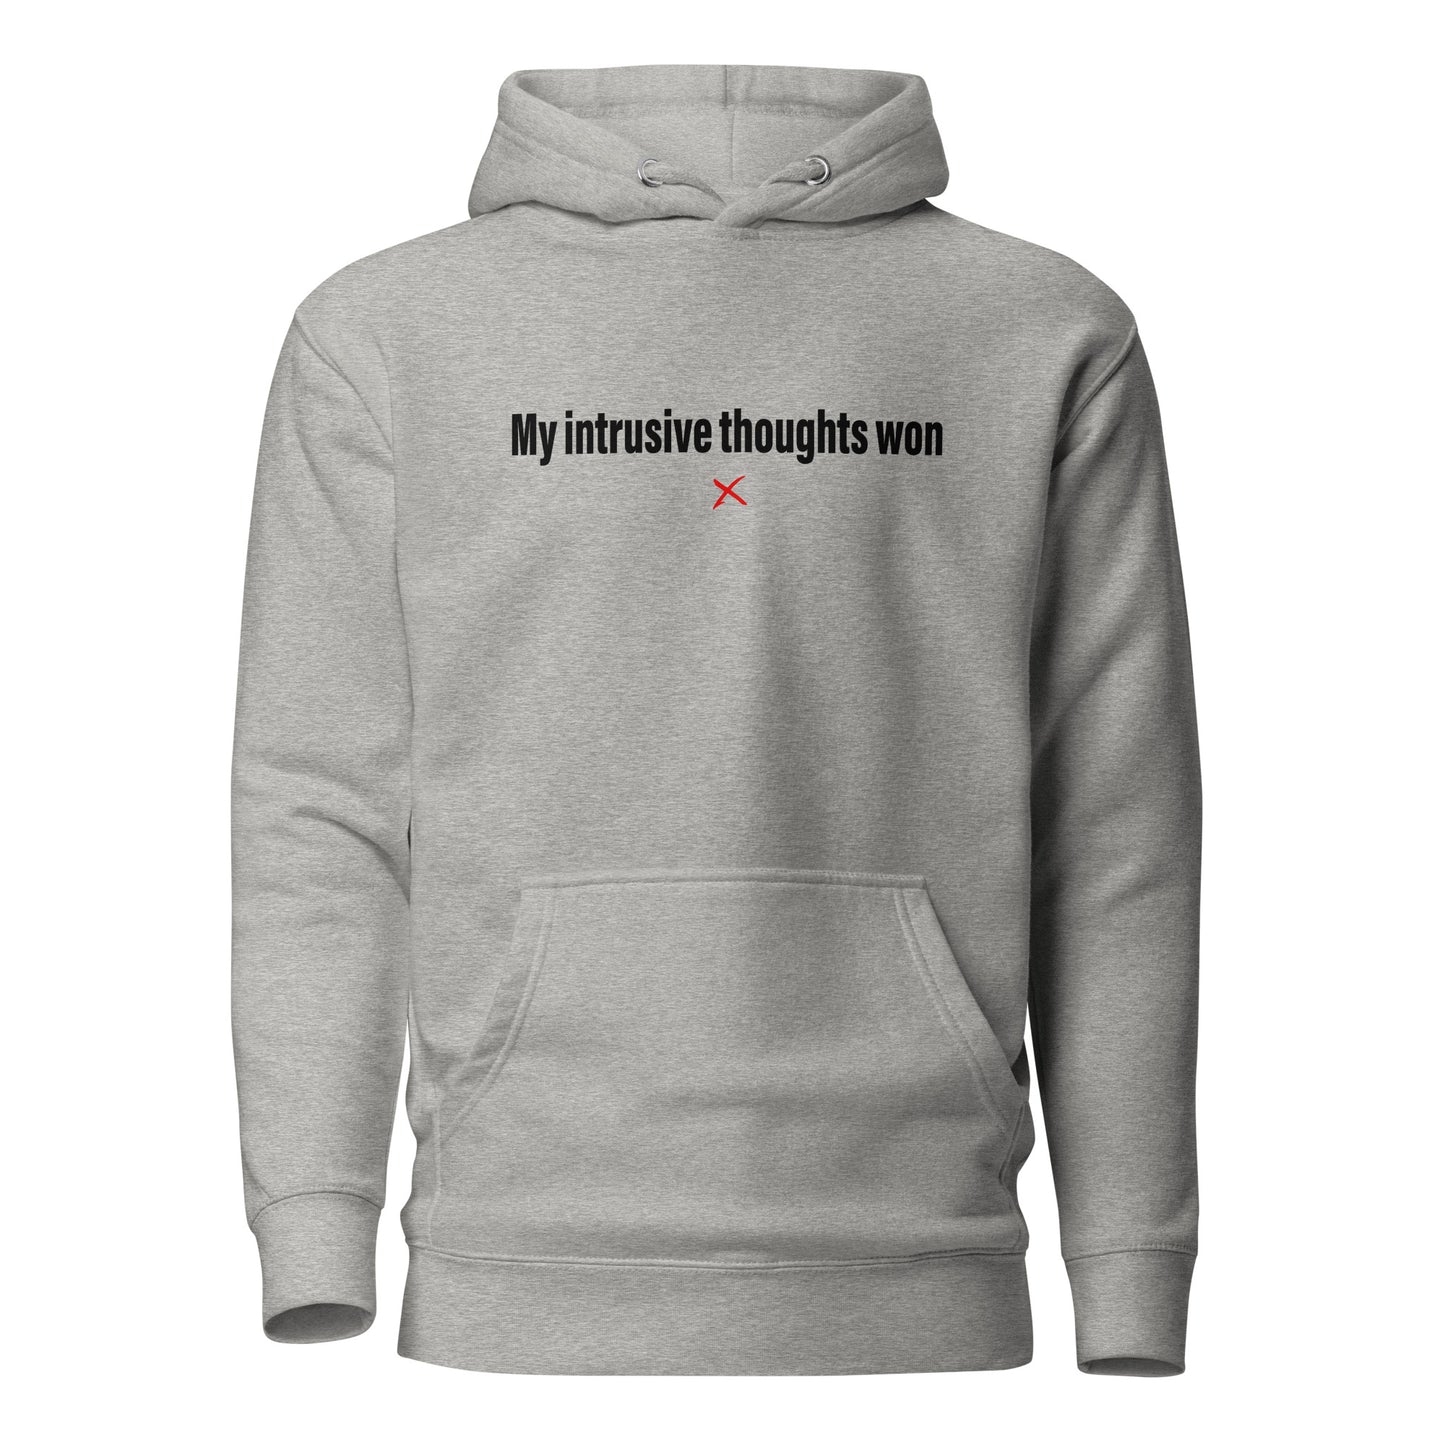 My intrusive thoughts won - Hoodie